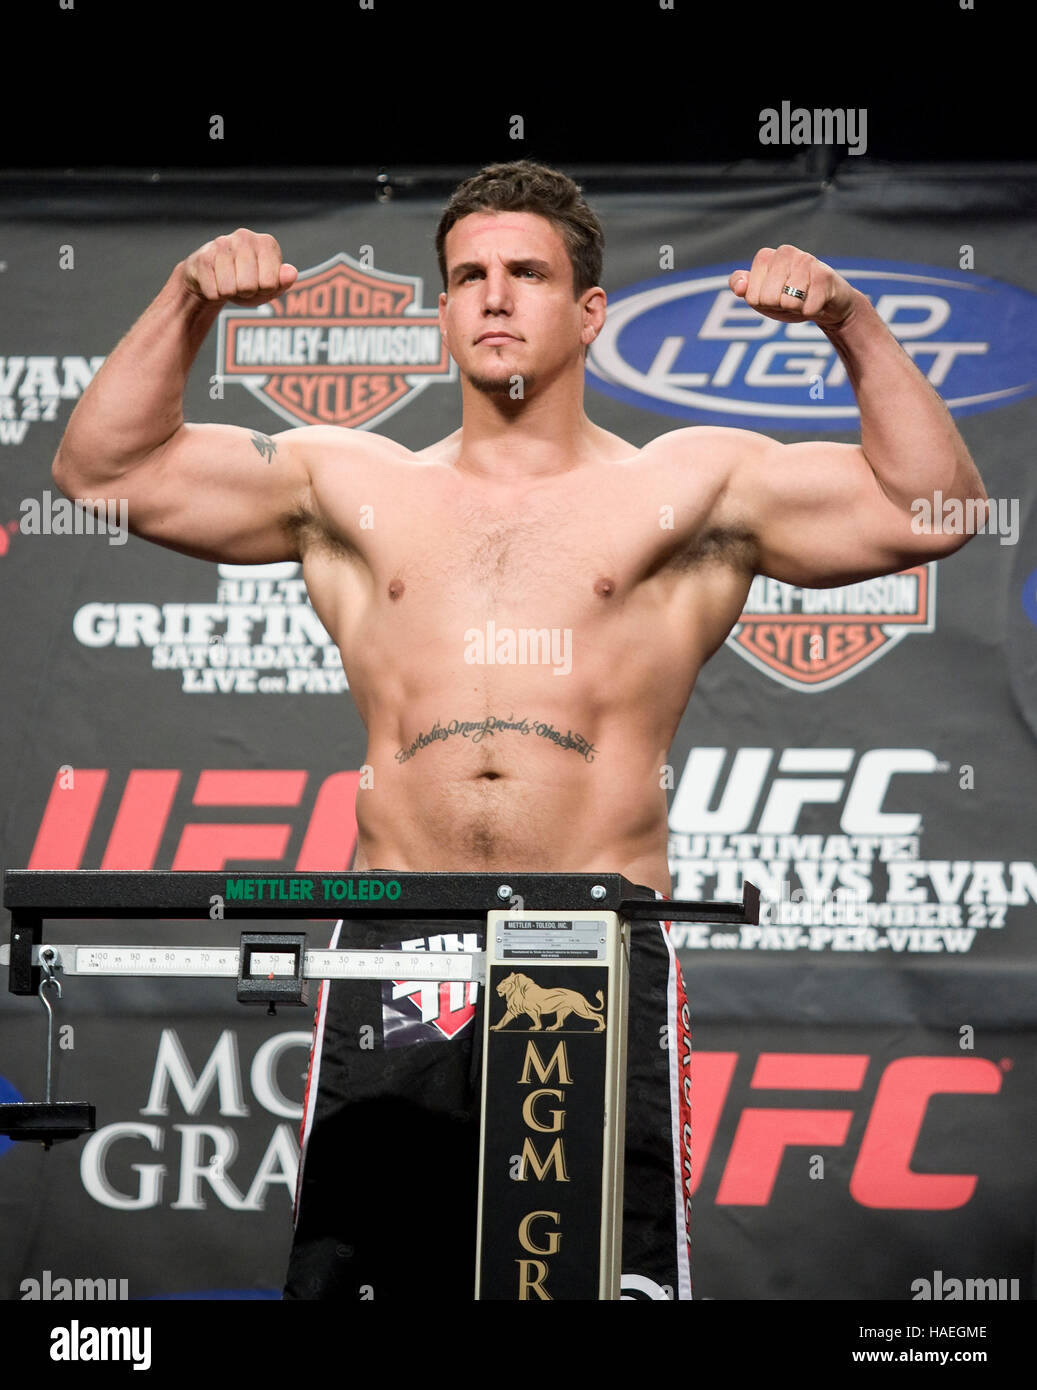 frank-mir-at-the-ufc-92-weigh-ins-at-the-mgm-grand-ballroom-on-december-HAEGME.jpg